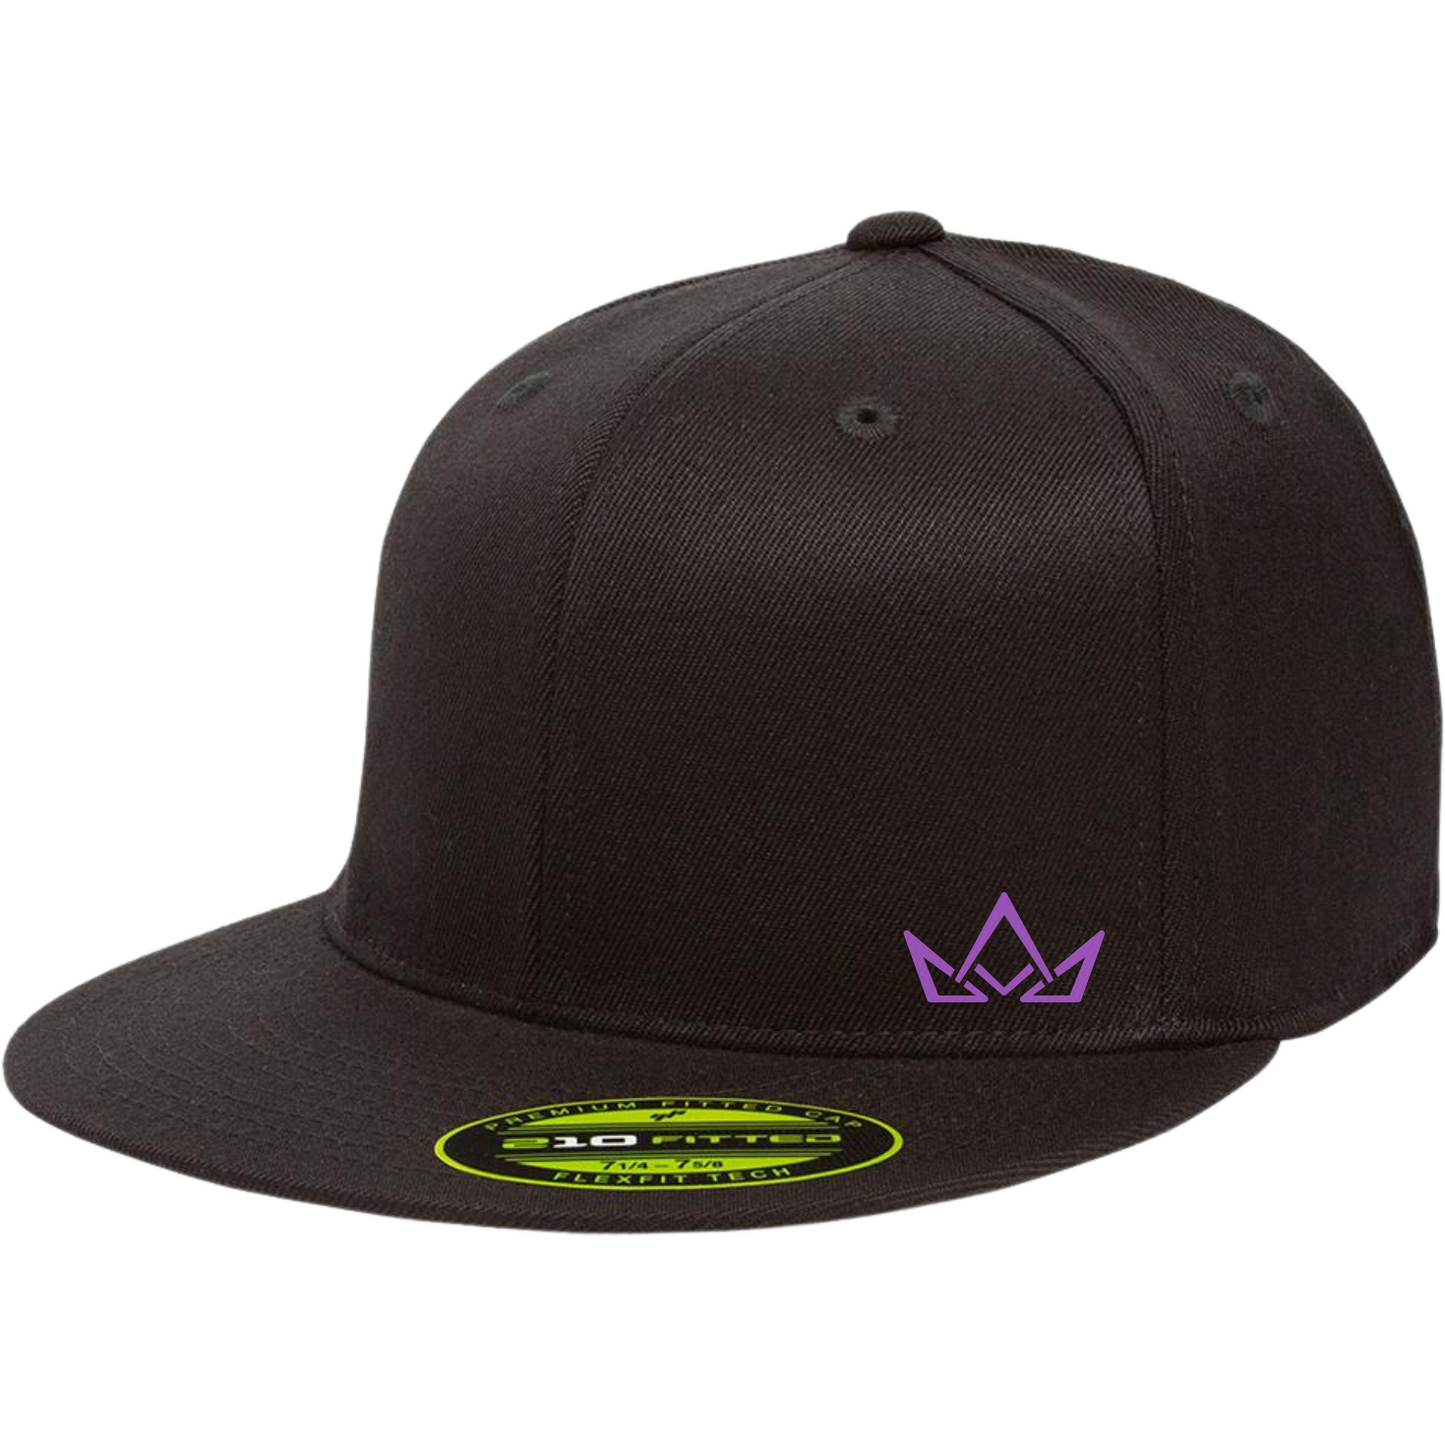 Ride Co. Premium Flatbill Fitted Hat